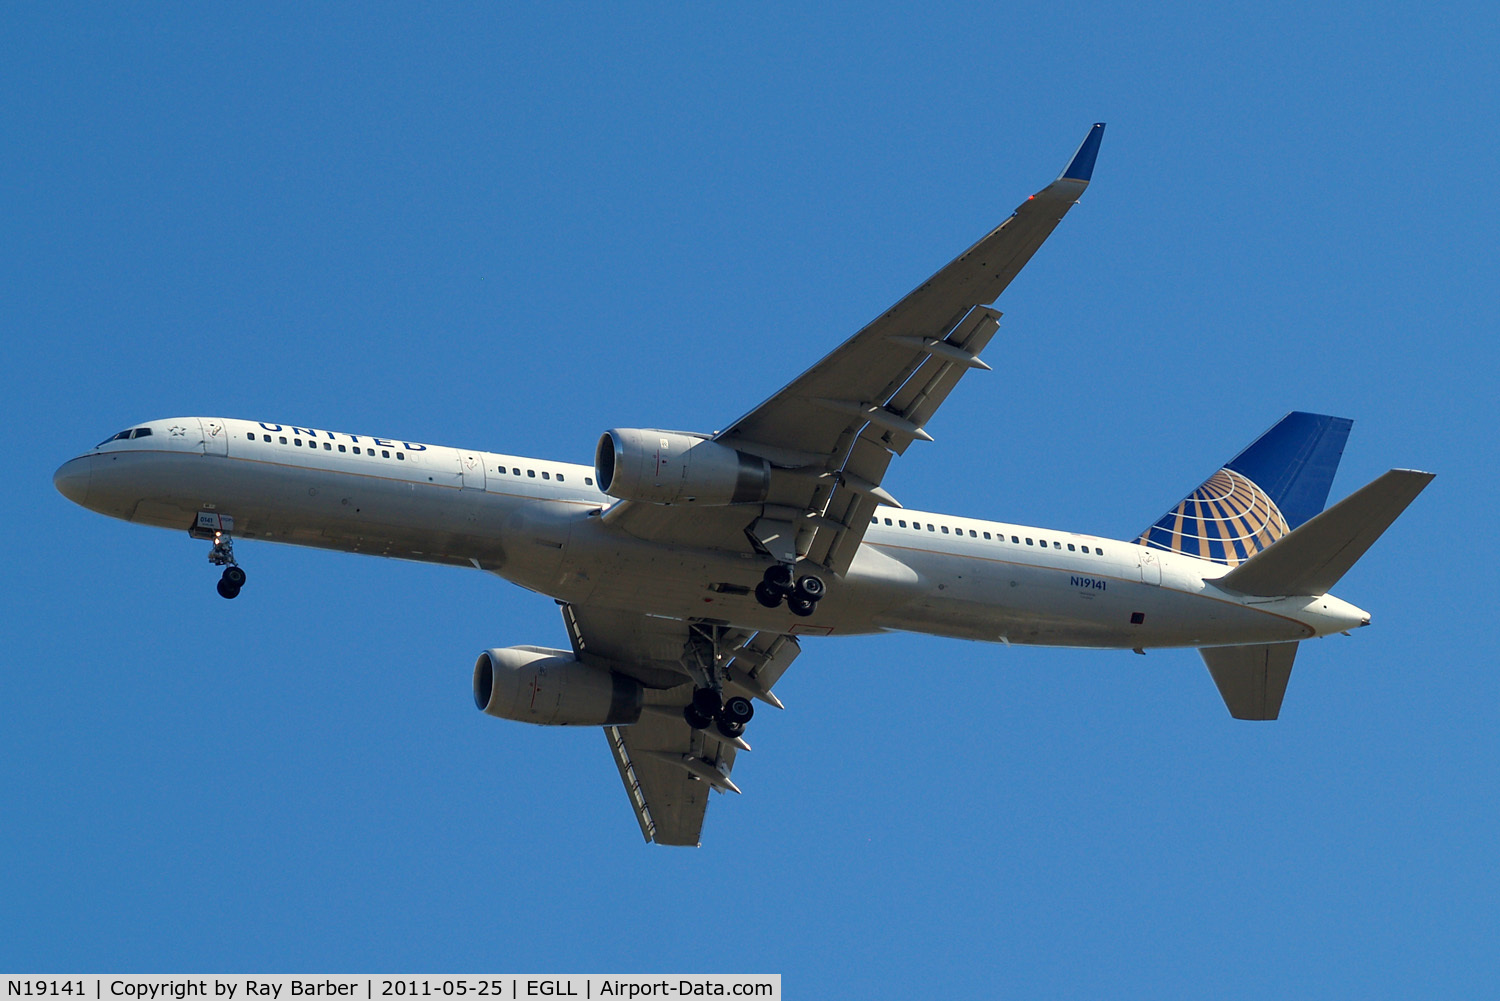 N19141, 2000 Boeing 757-224 C/N 30354, Boeing 757-224 [30354] (United Airlines) Home~G 25/05/2011. On approach 27R.